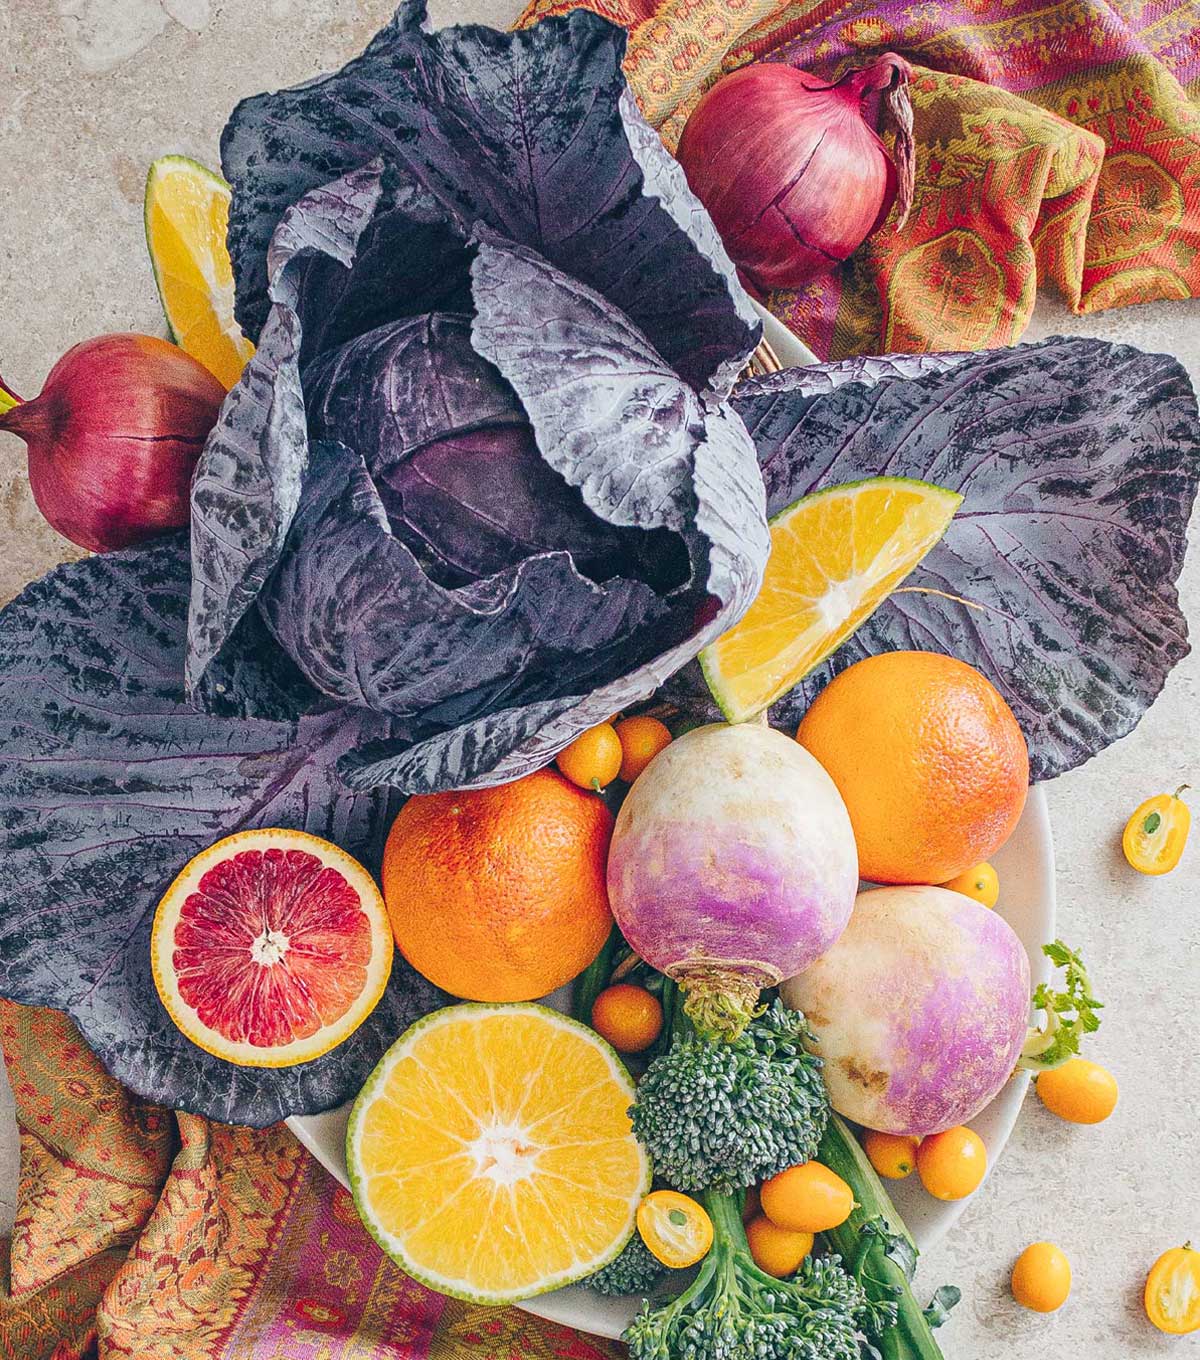 A display of seasonal fruits and vegetables for February: purple cabbage, turnips, broccoli, onions, blood oranges, ugly fruit, and kumquats on a paisley runner.